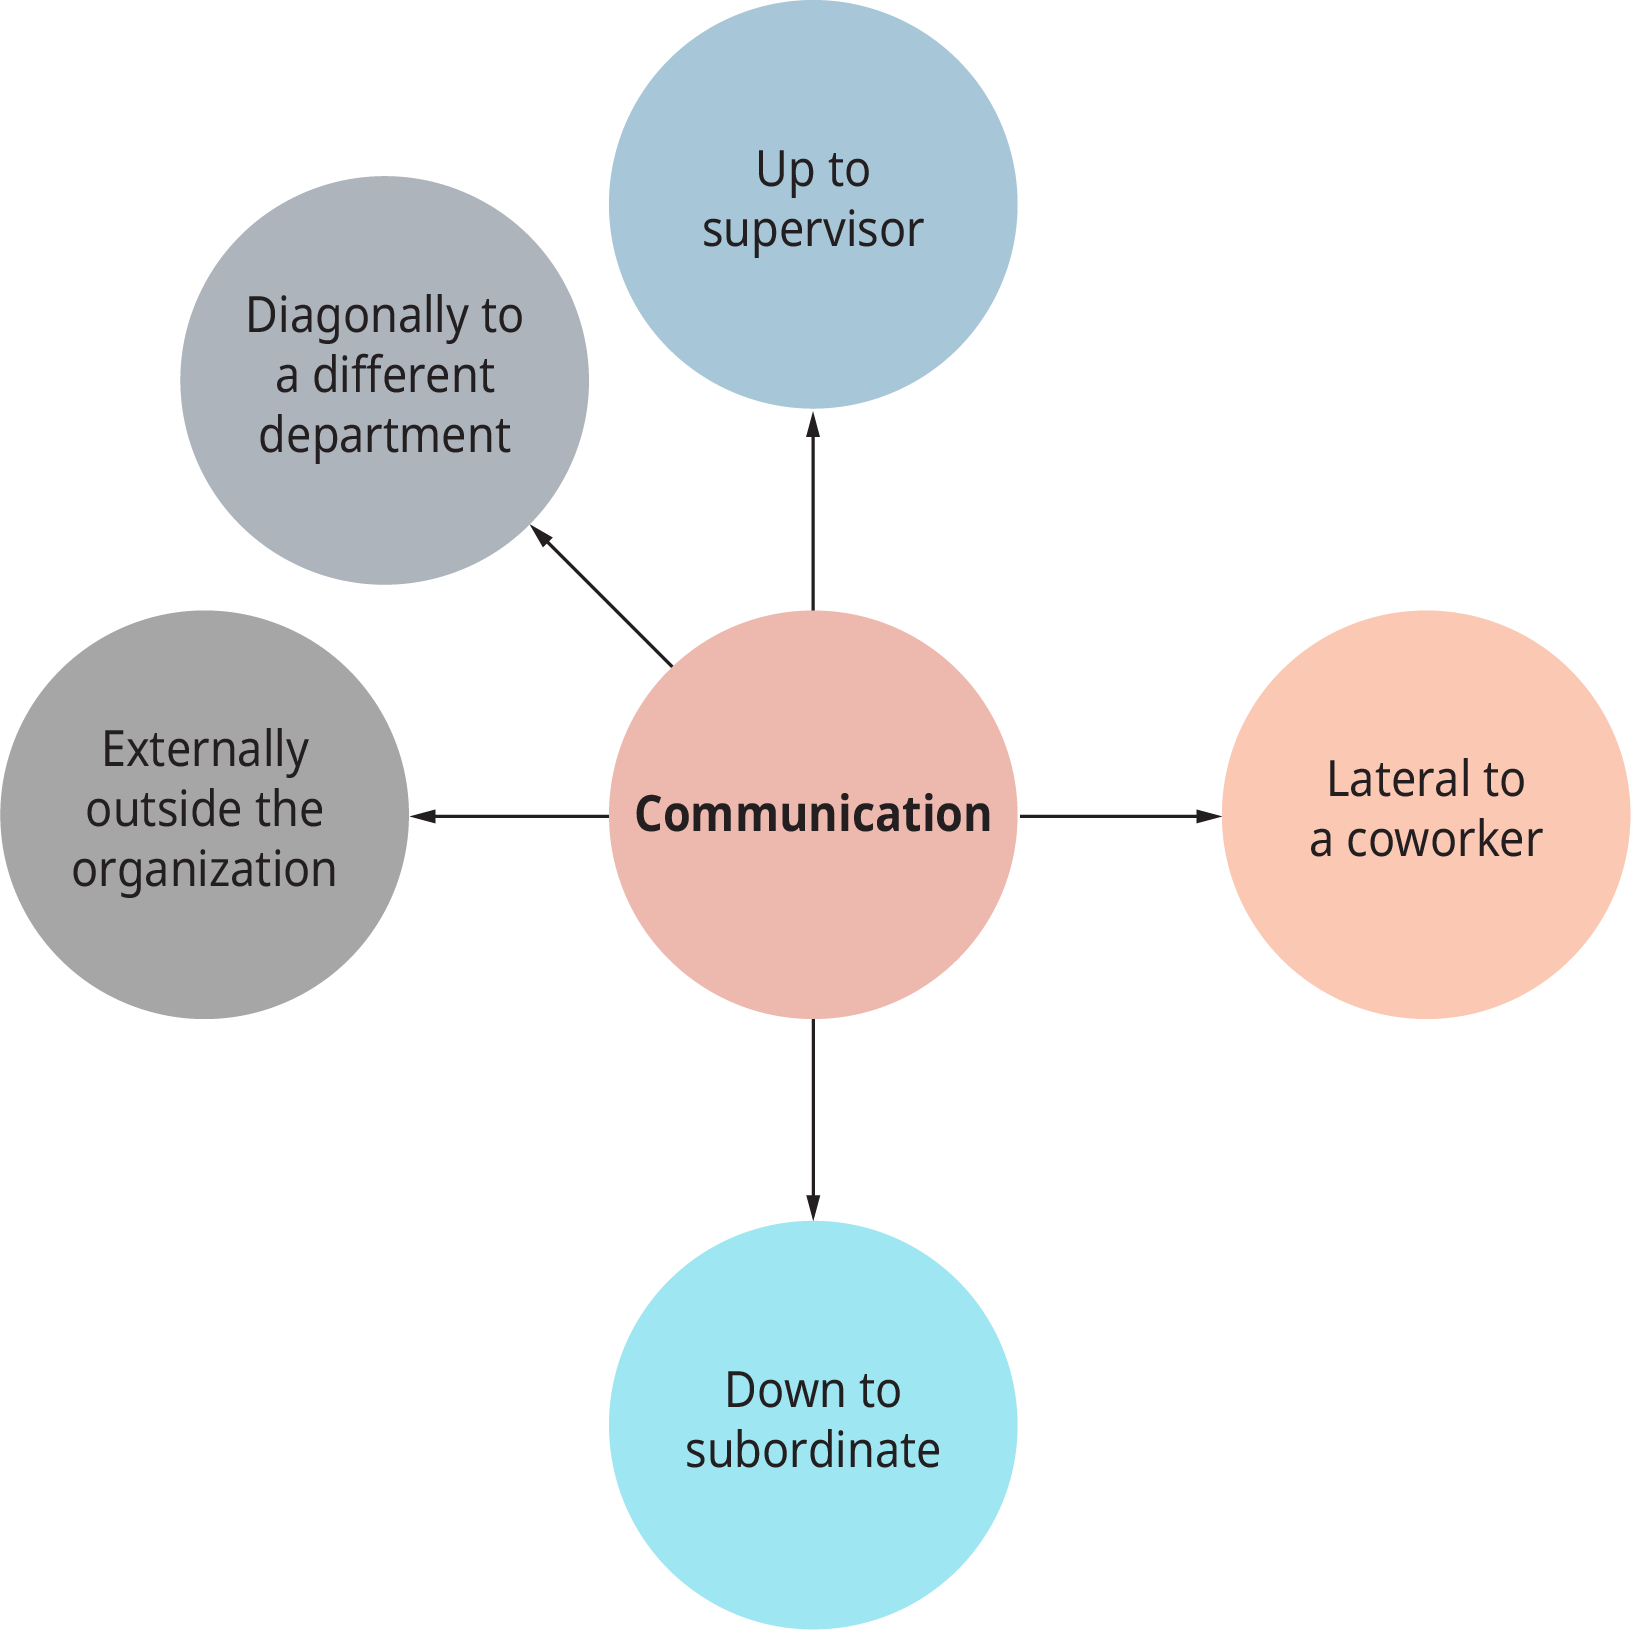 presentation about communication in an organization